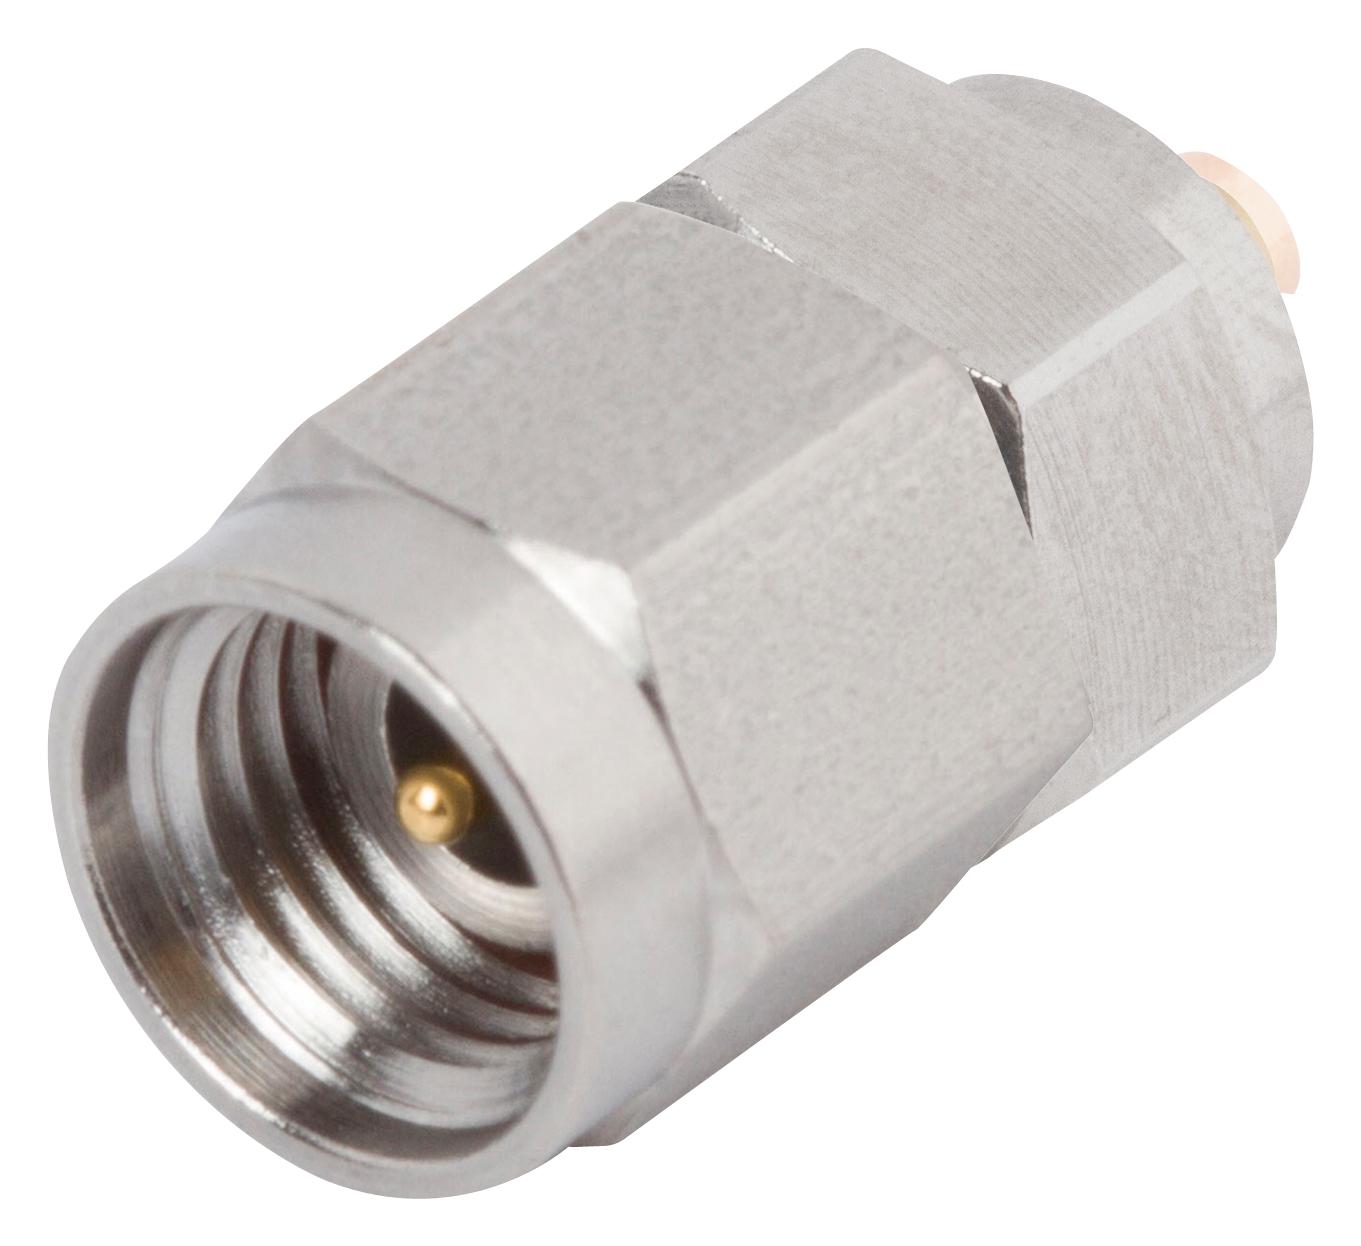 SF1511-60071 RF COAXIAL, 2.92MM PLUG, 50 OHM, CABLE AMPHENOL SV MICROWAVE